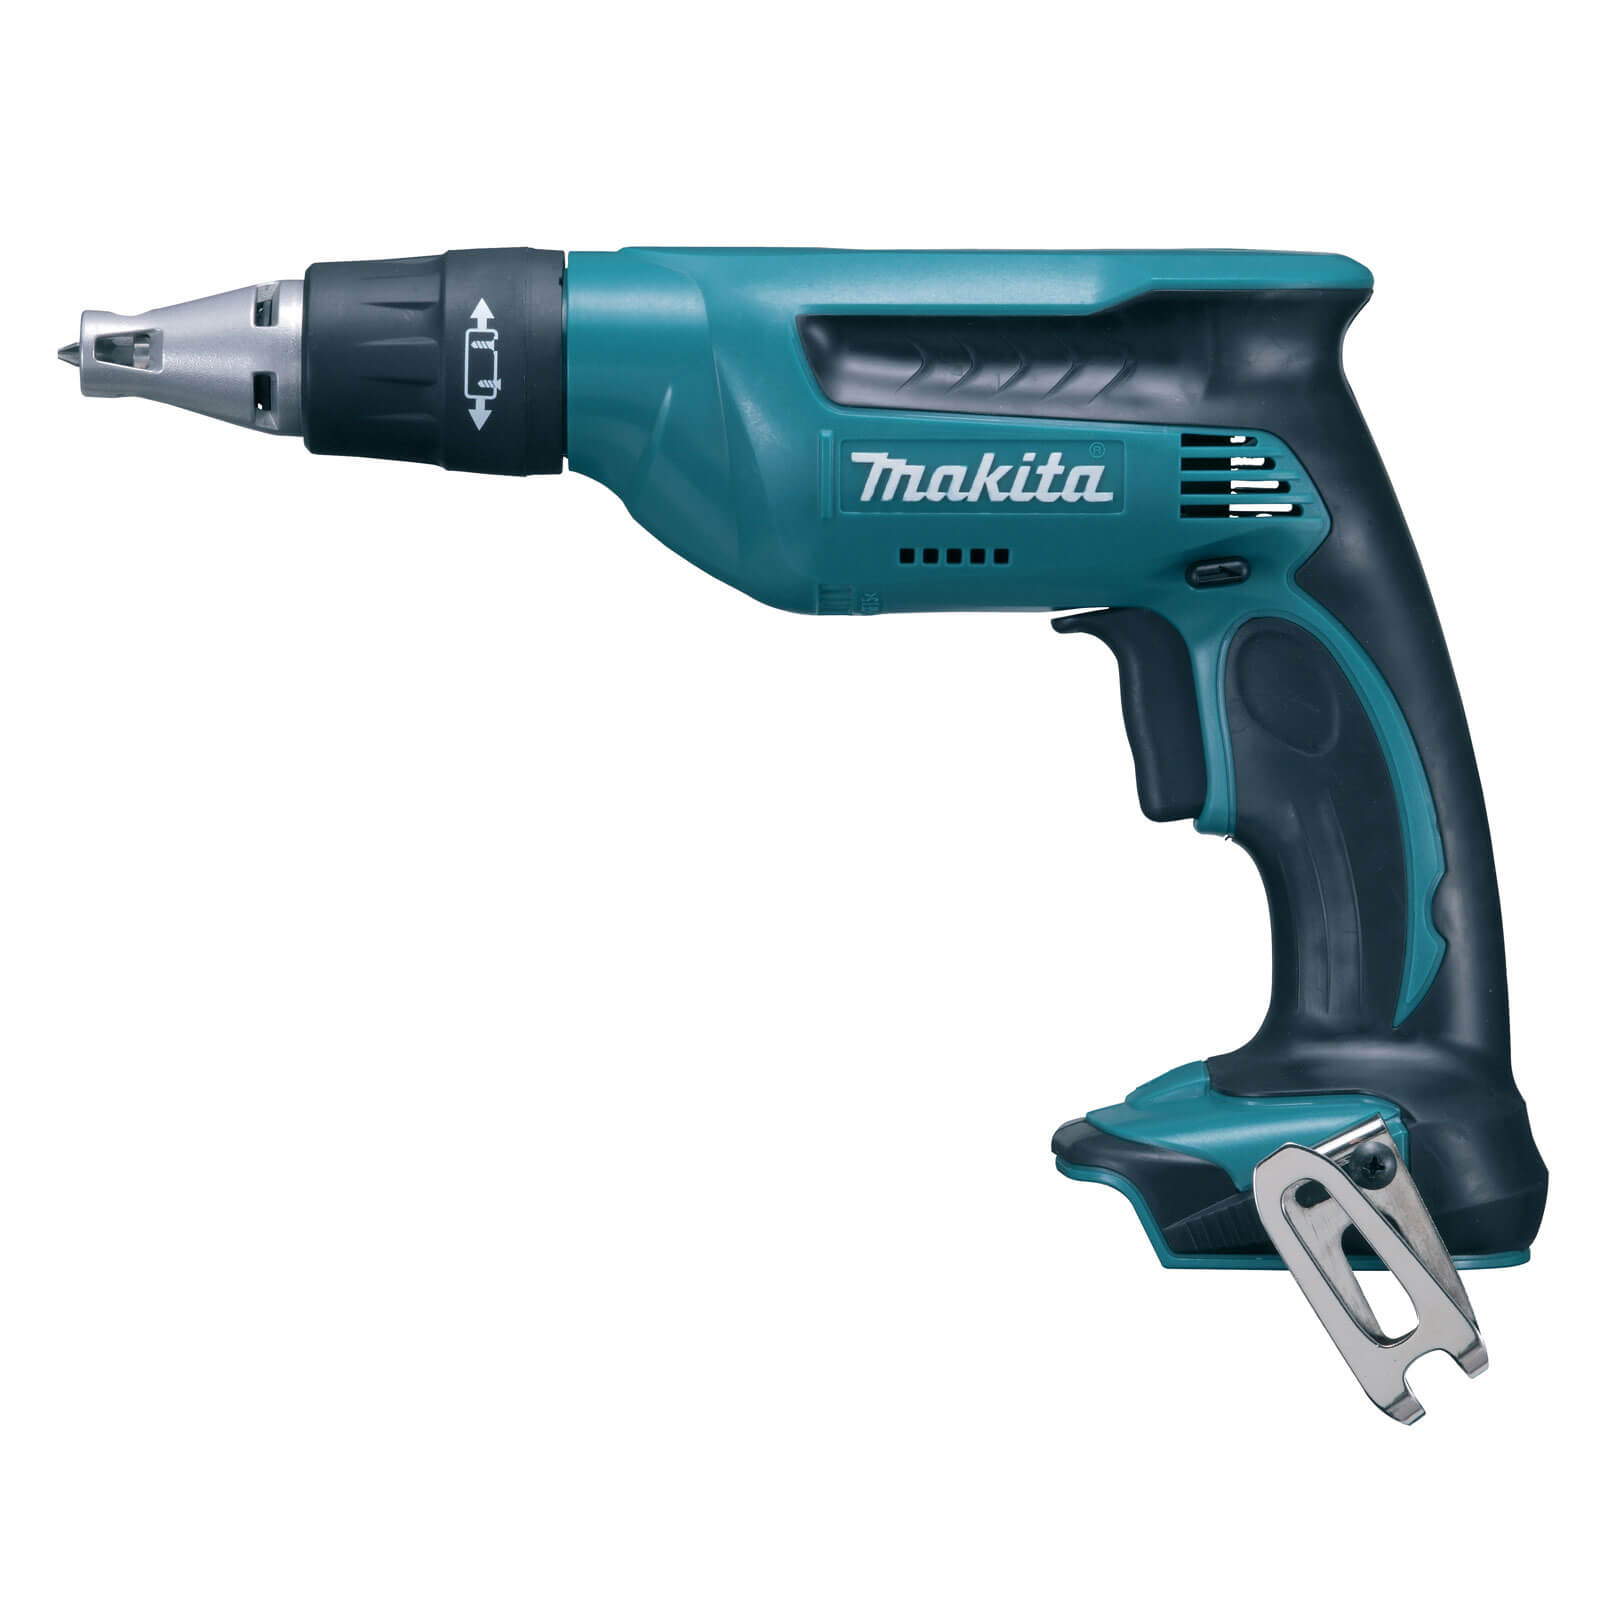 Image of Makita DFS451 18v LXT Cordless Brushless Screw Driver No Batteries No Charger No Case